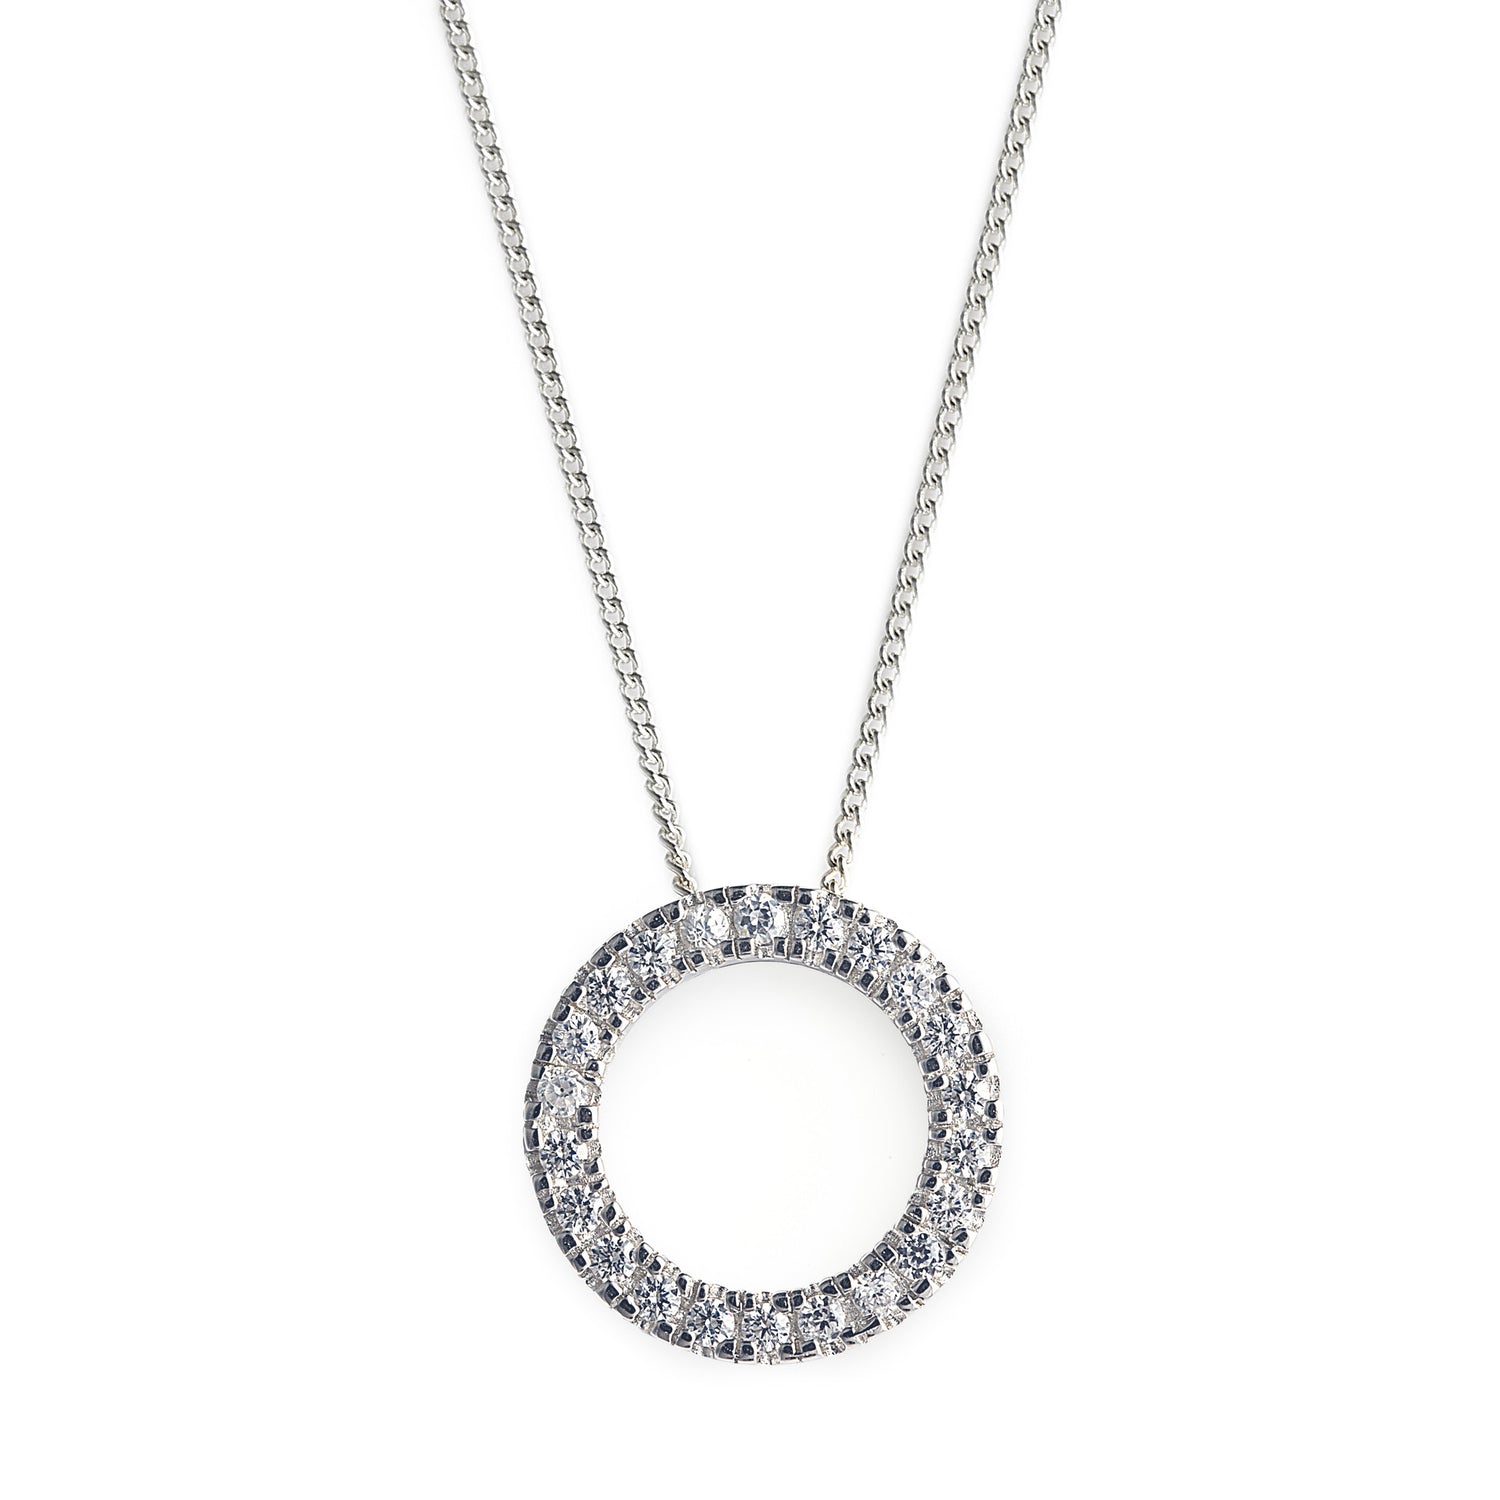 O Bliss Necklace in 925 Sterling Silver with Cubic Zirconia Stones. Worldwide Shipping. Bellagio & Co Jewellery.